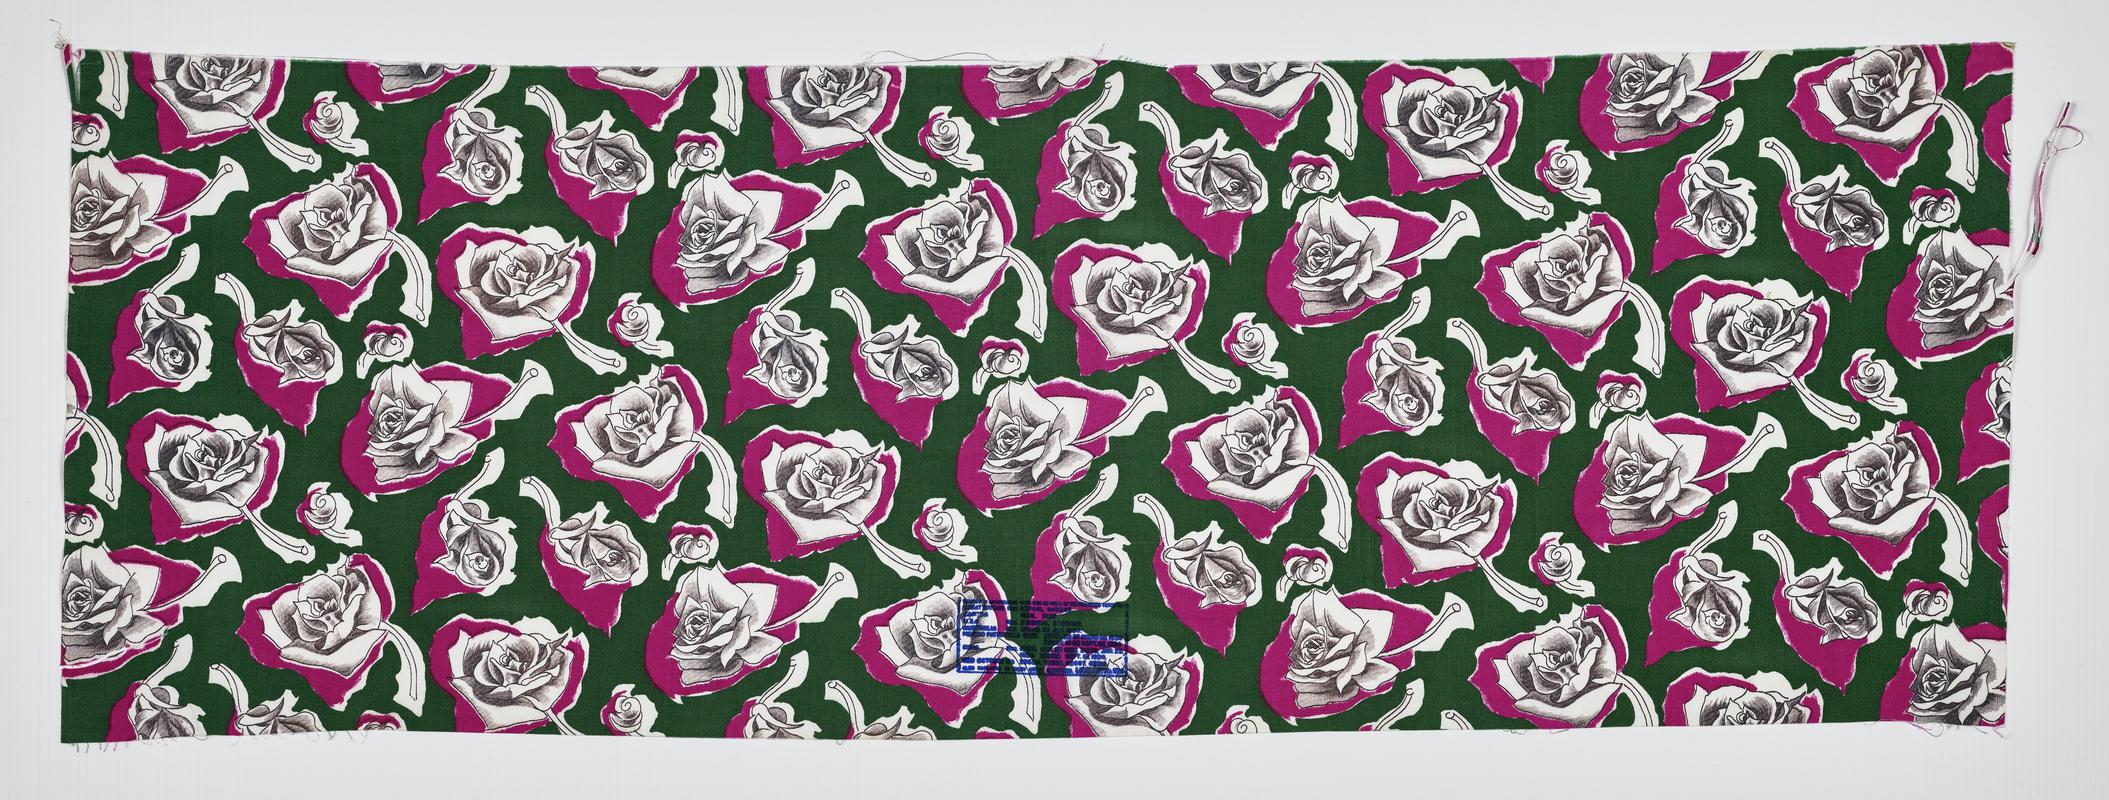 Fabric - Green with purple  Roses